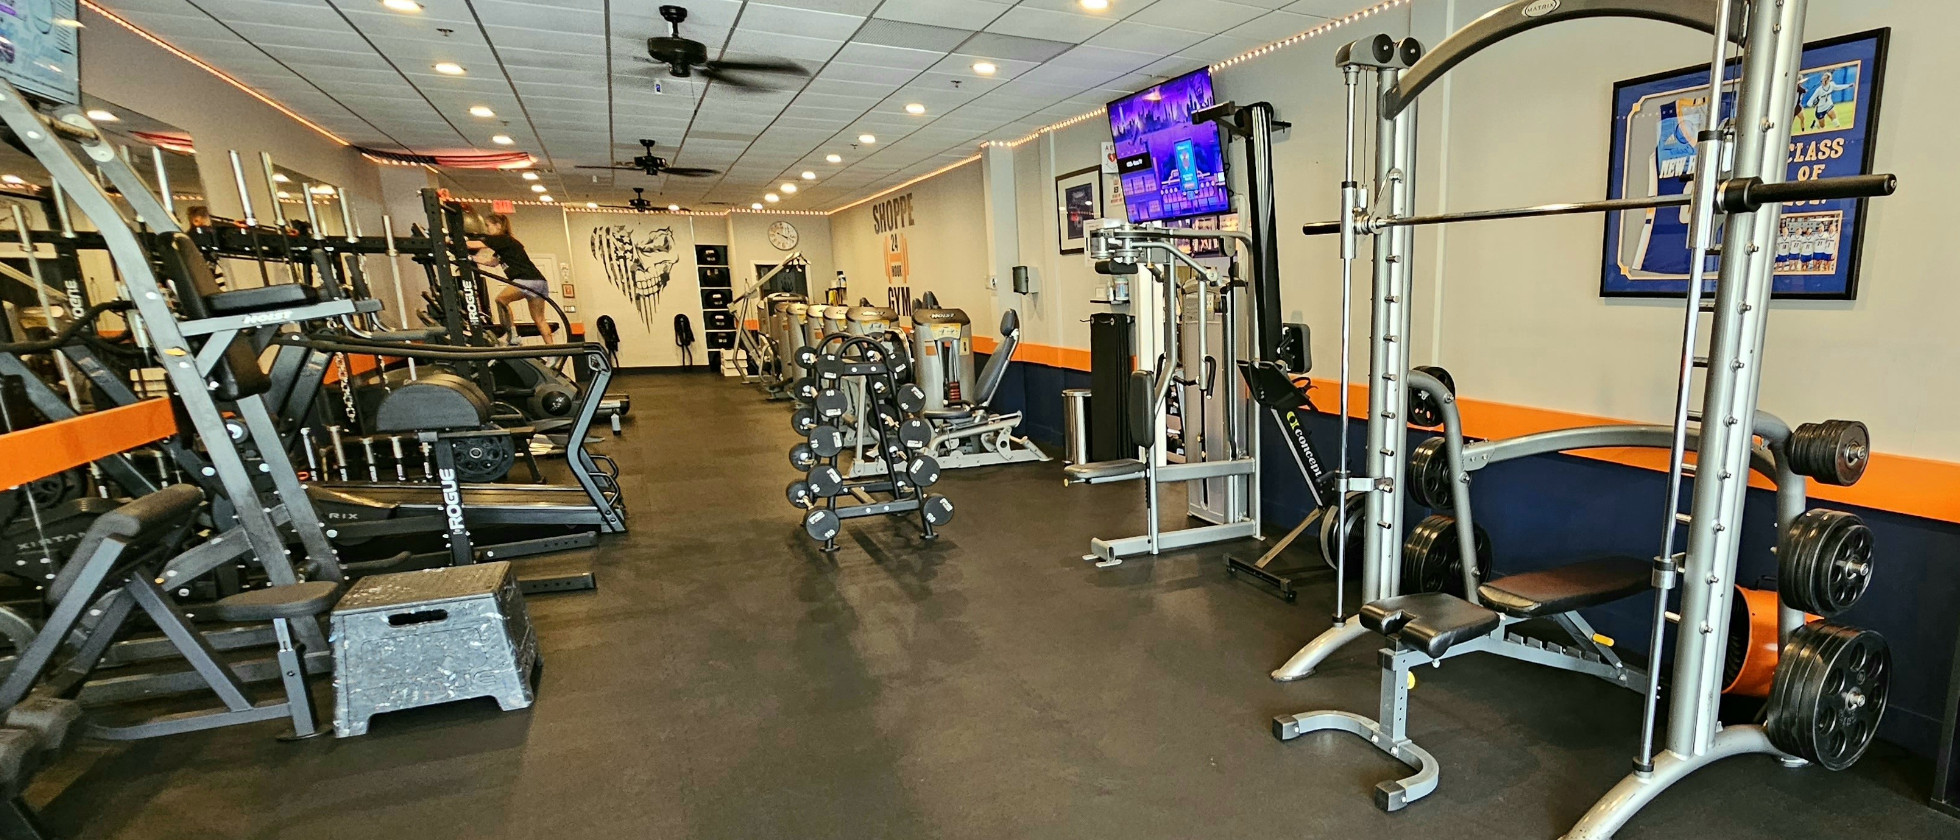 The Best 24-Hour Gym In Montville, New Jersey